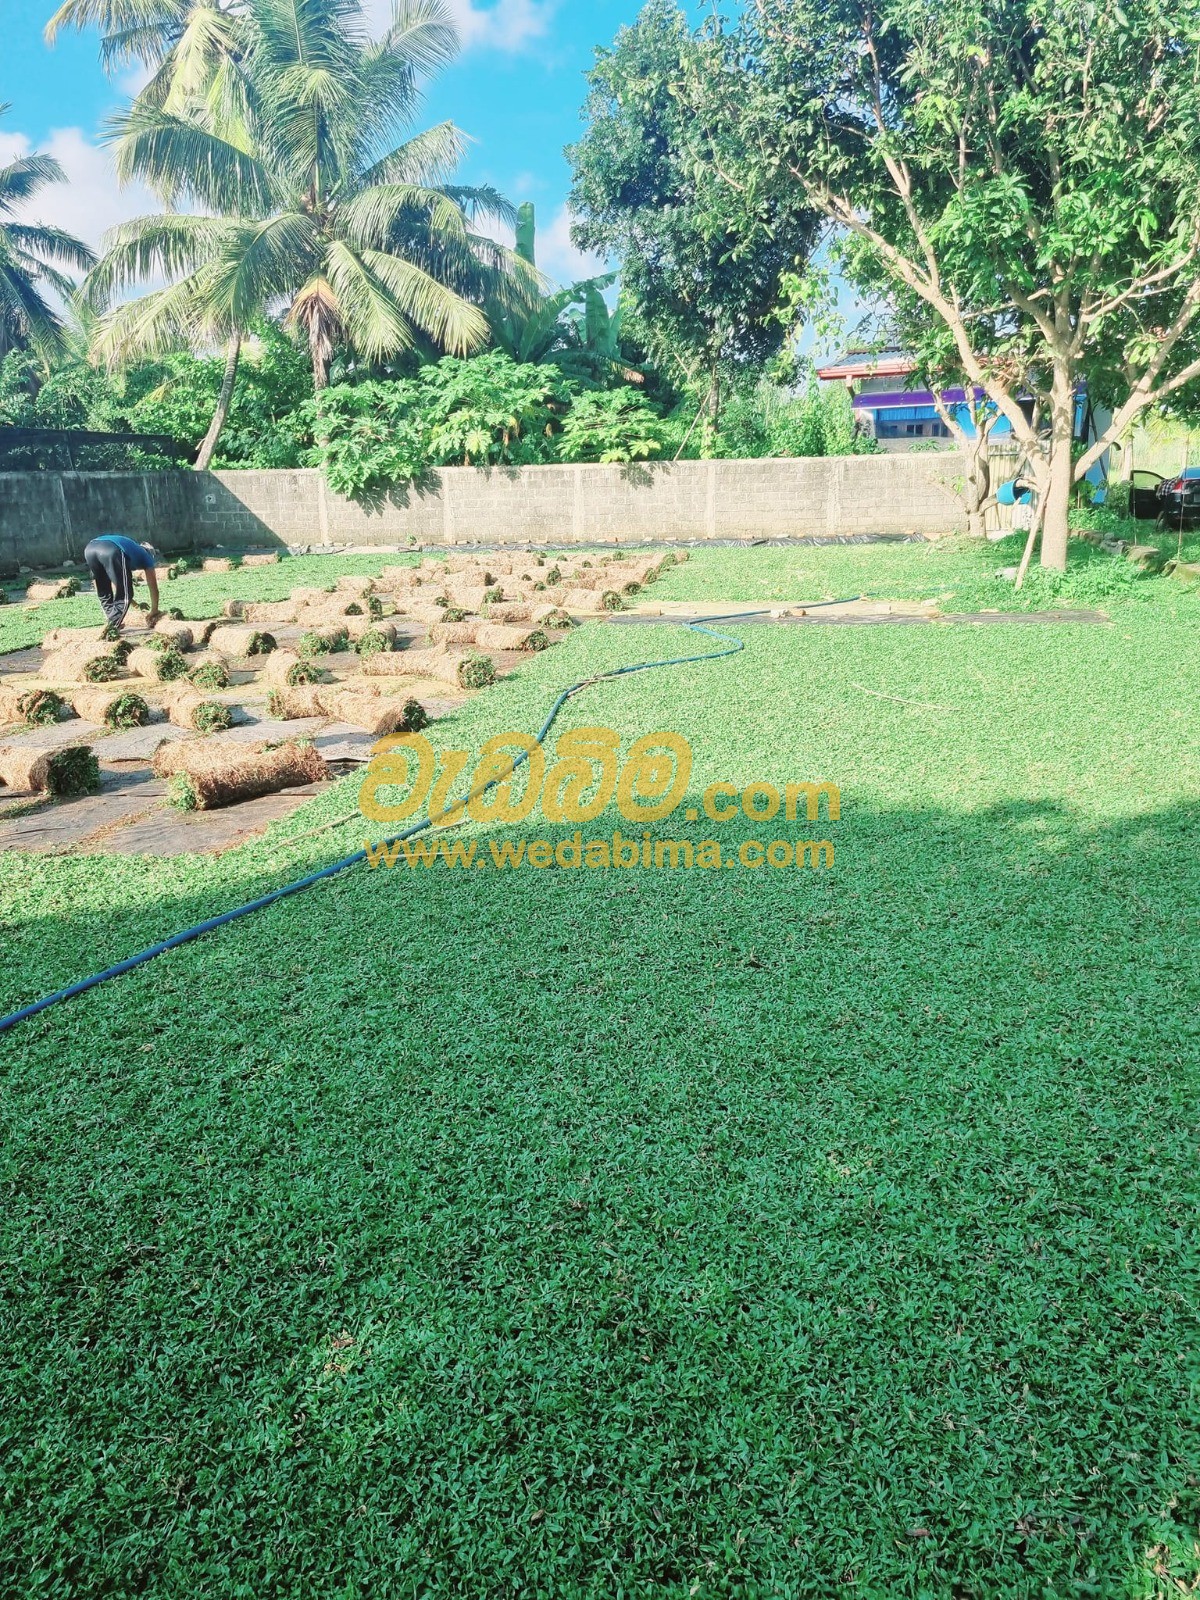 Cover image for Landscaping companies in Sri Lanka